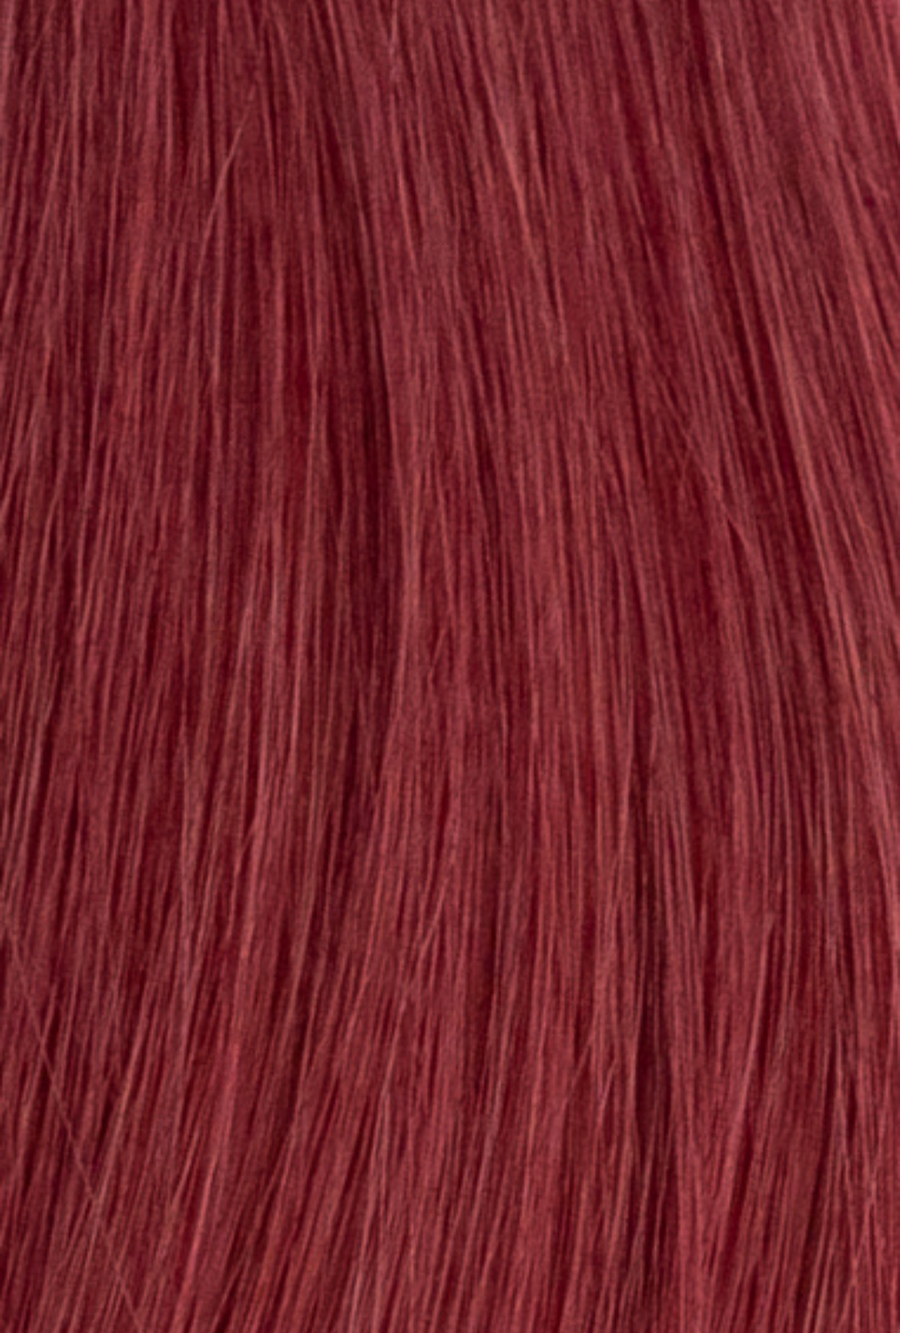 Keratin Bond Ruby Red - Discontinued